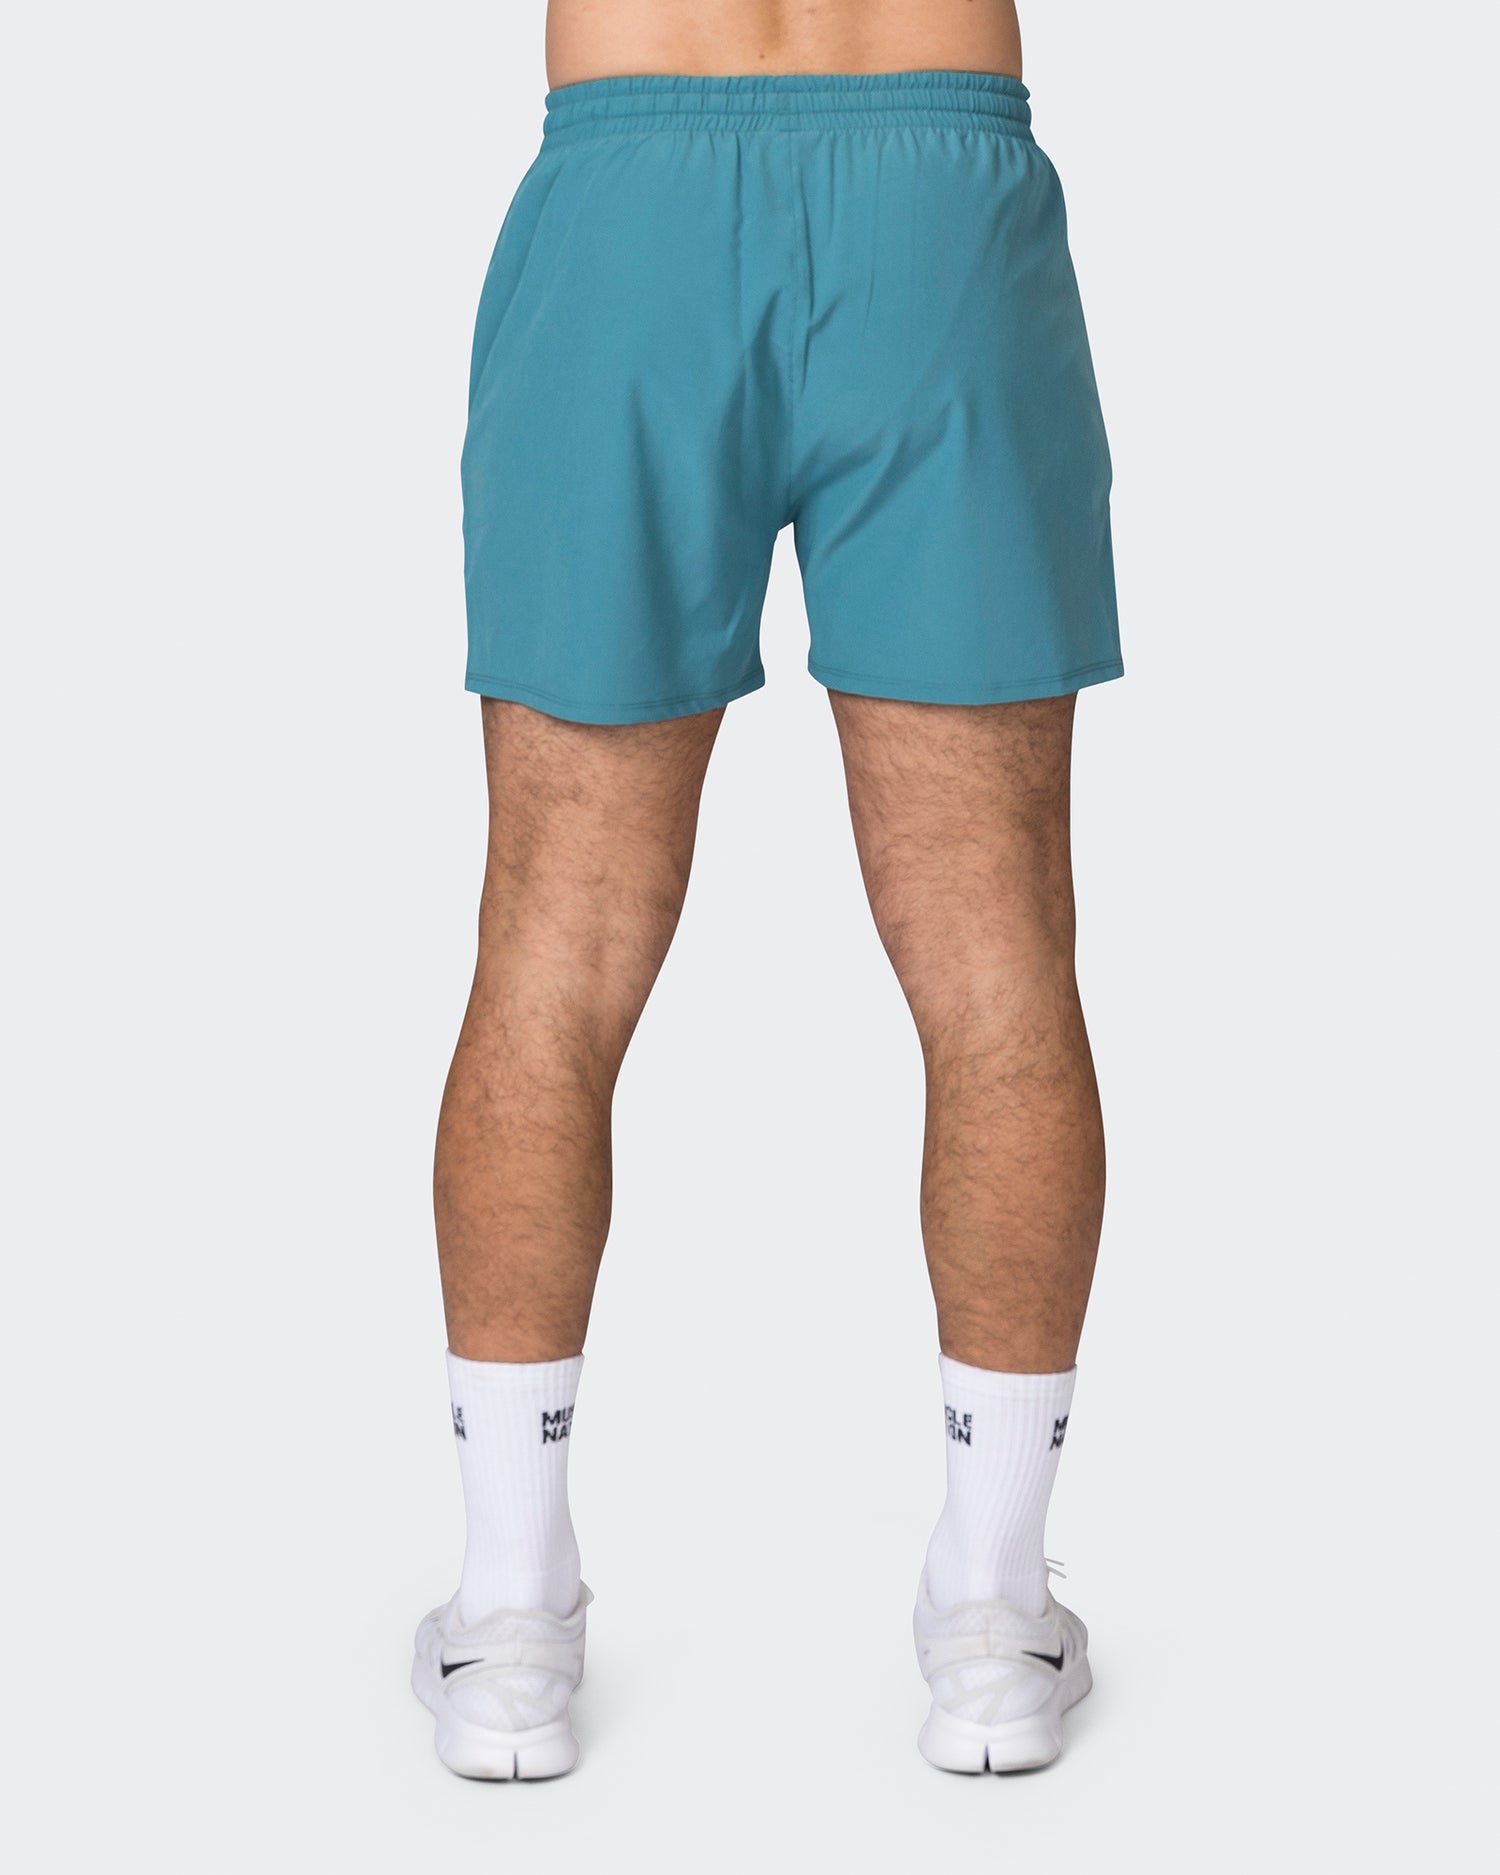 New Heights 4'' Shorts - Light Harbour